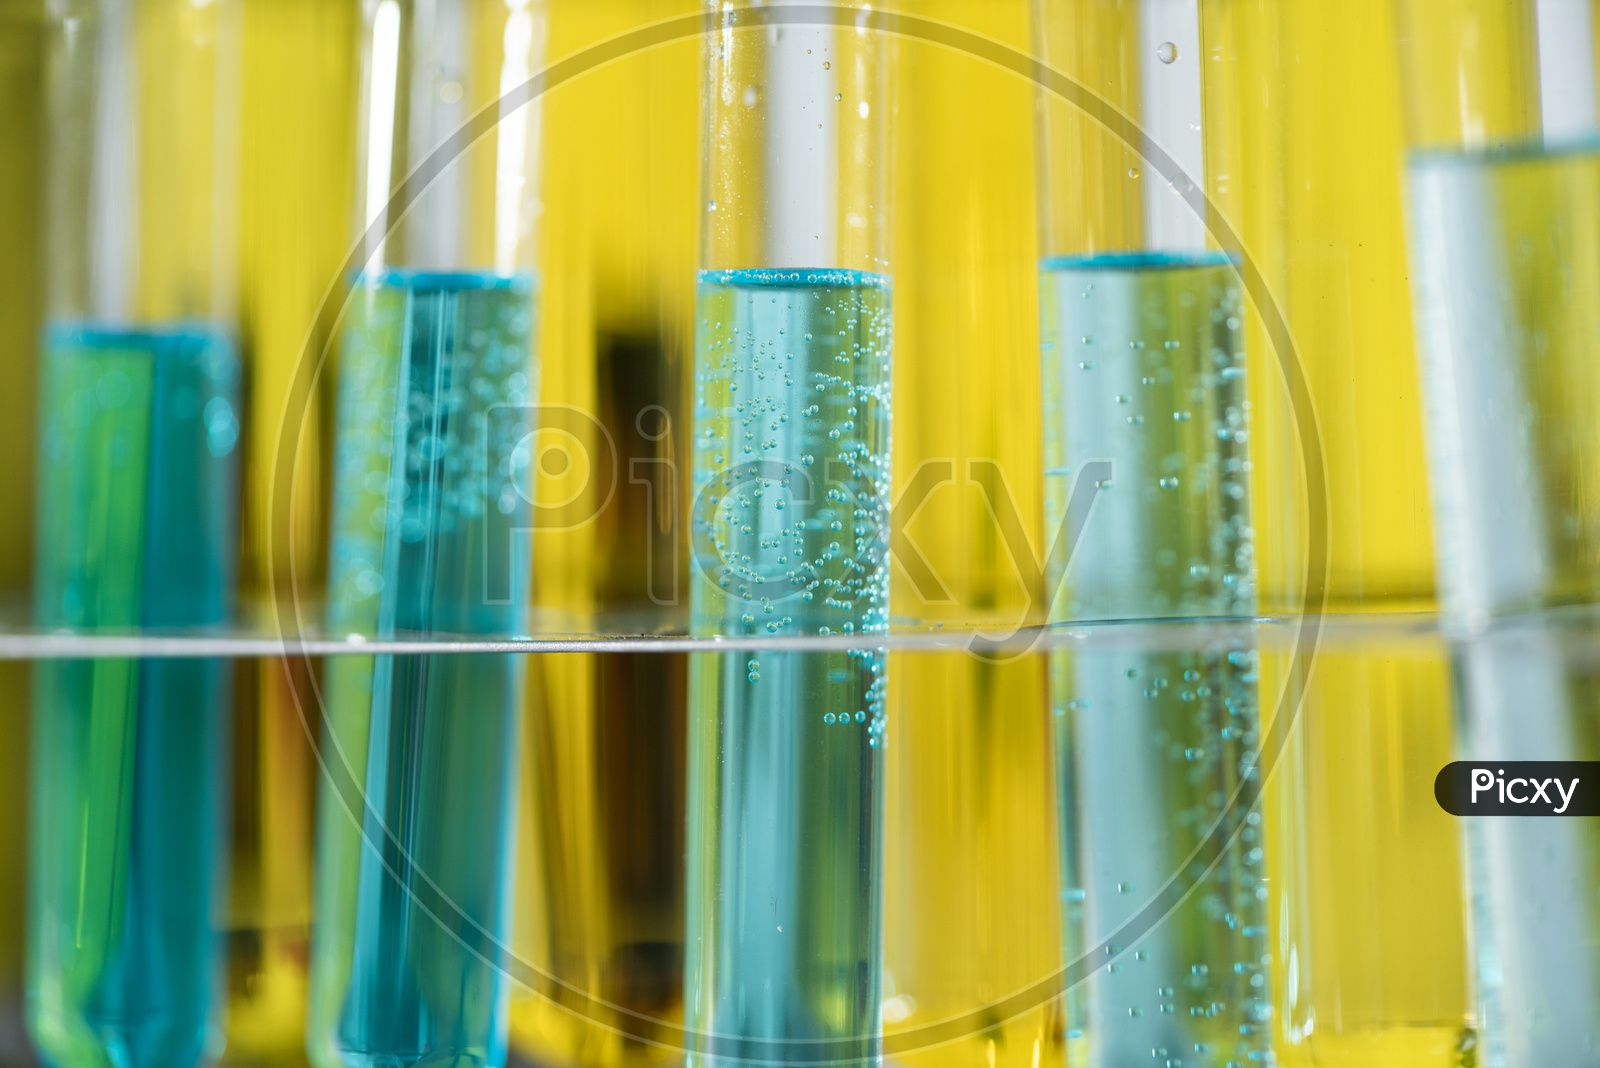 Research on Alternative Energy Chemicals in Test Tube at Laboratory for Energy Development